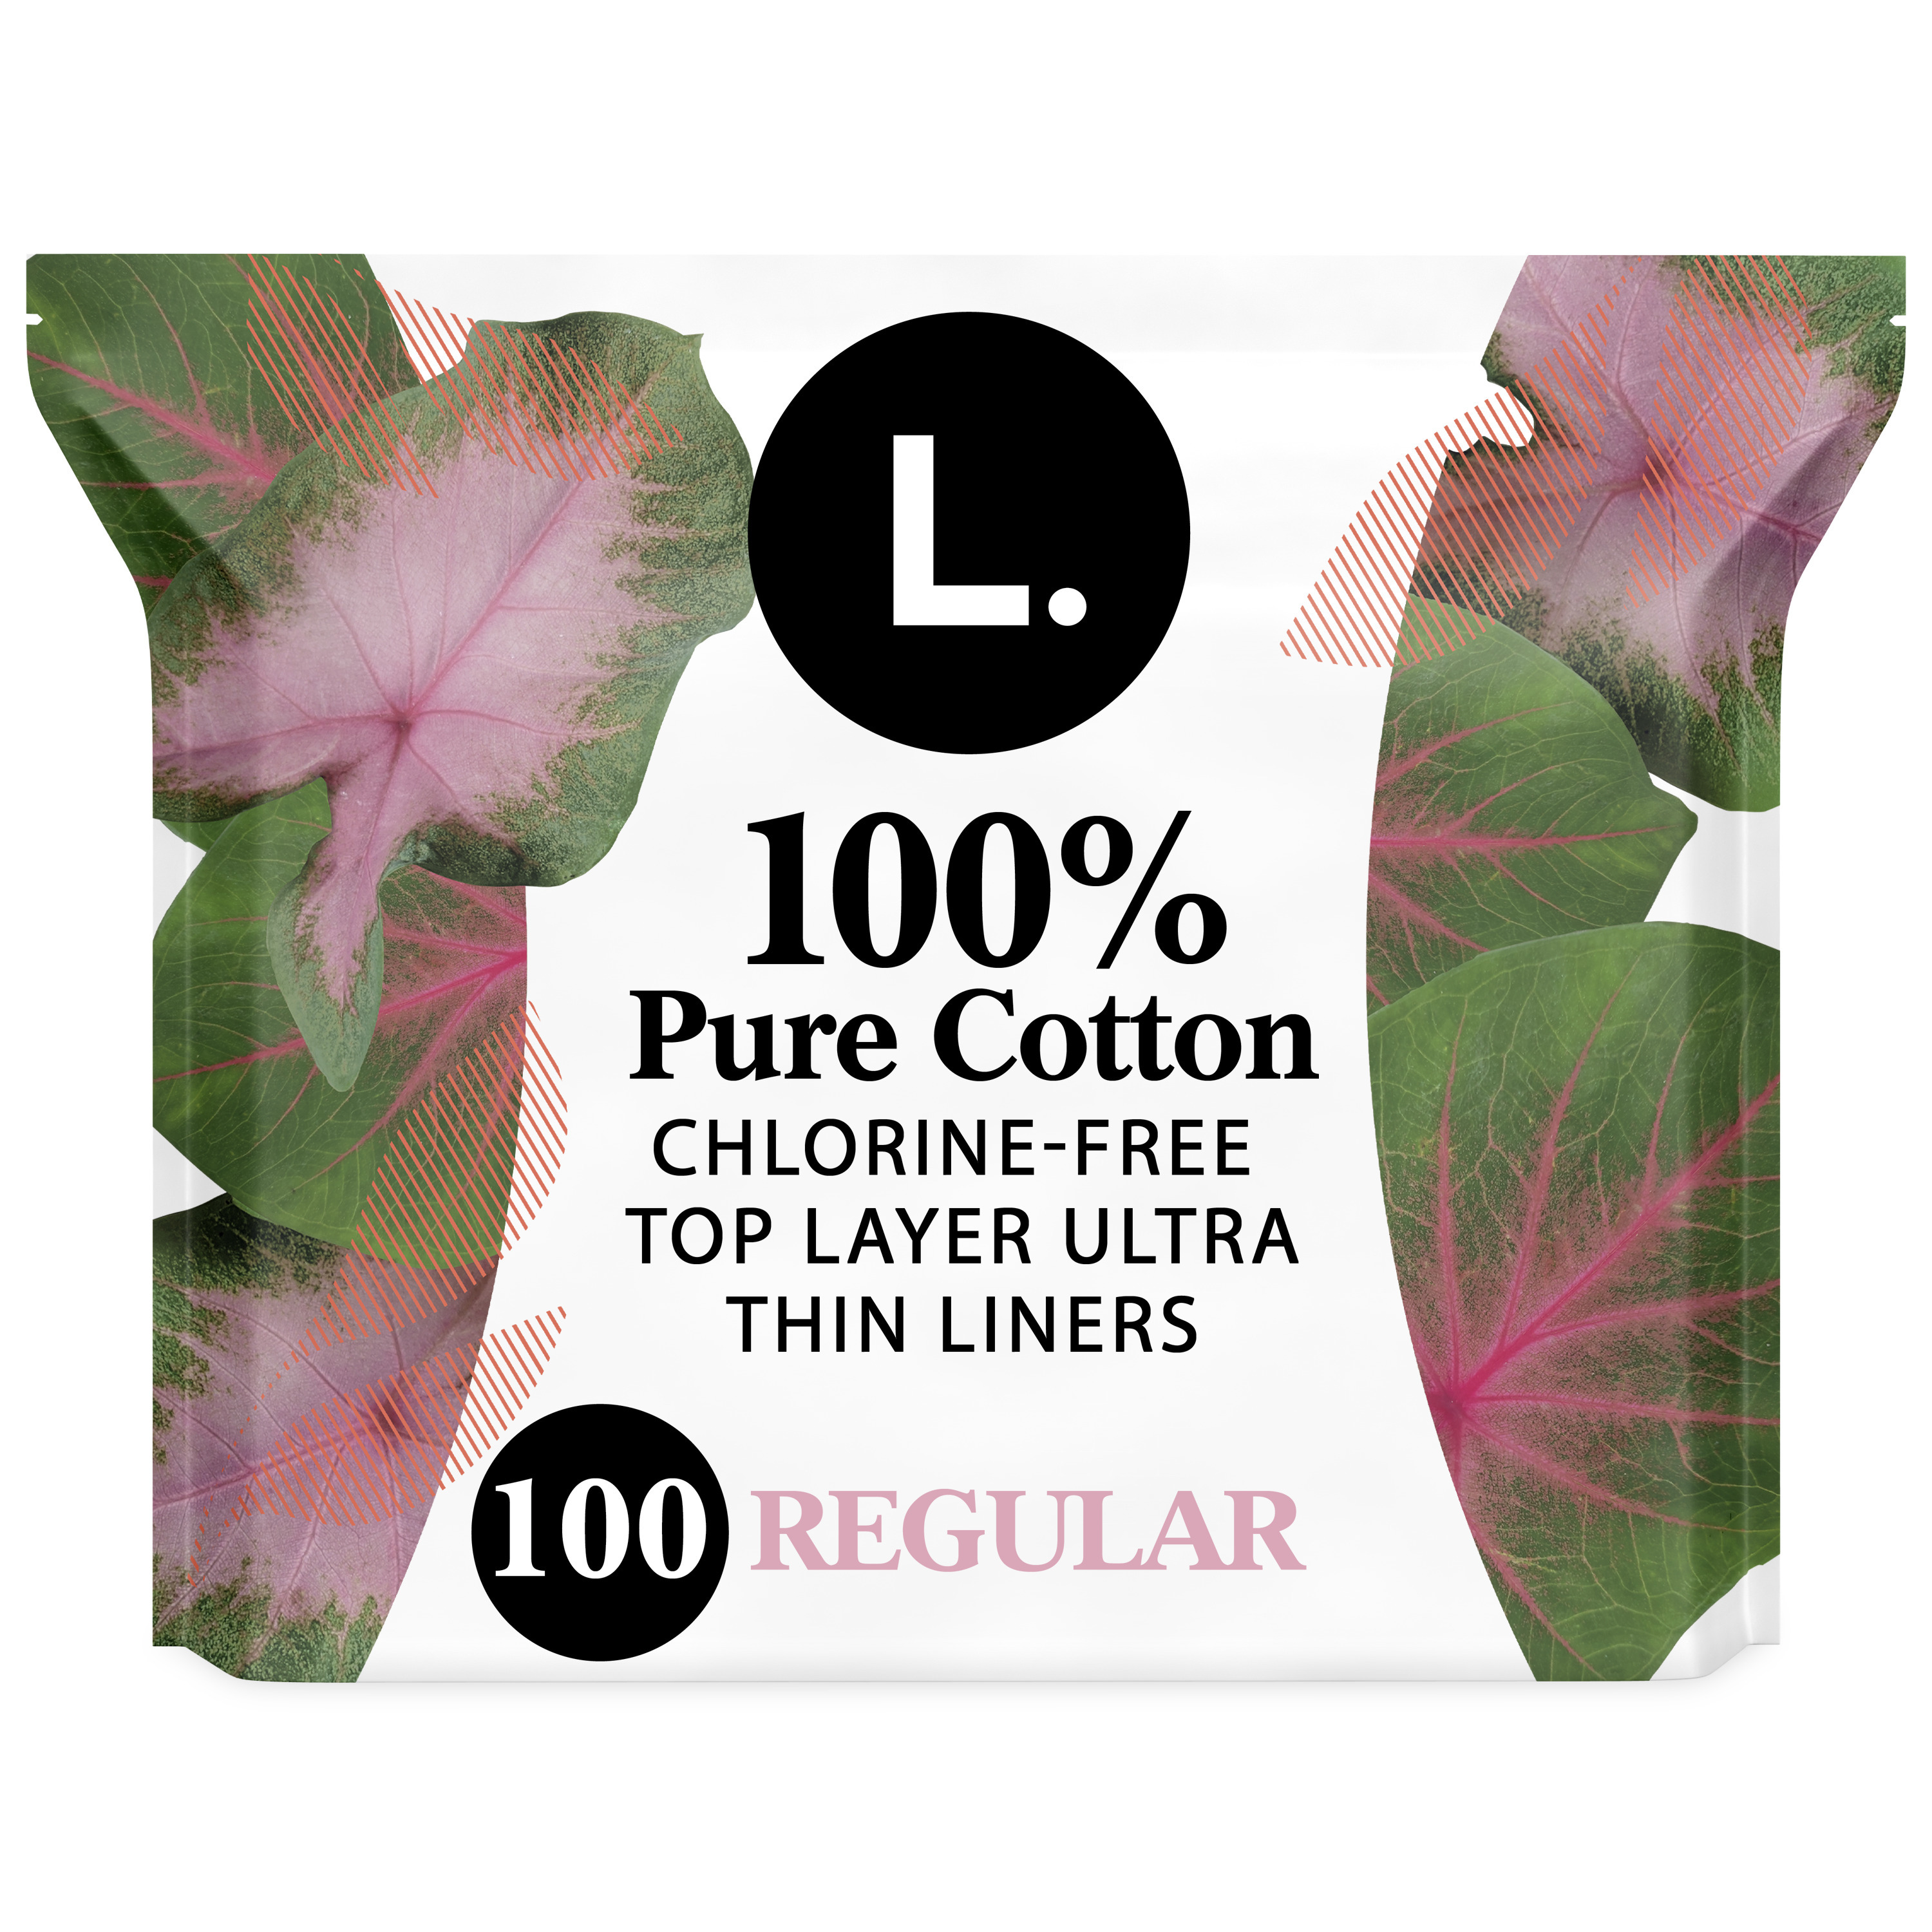 L. Ultra Thin Liners for Women, Regular, 100% Pure Cotton Top Layer 100 Ct - image 1 of 10